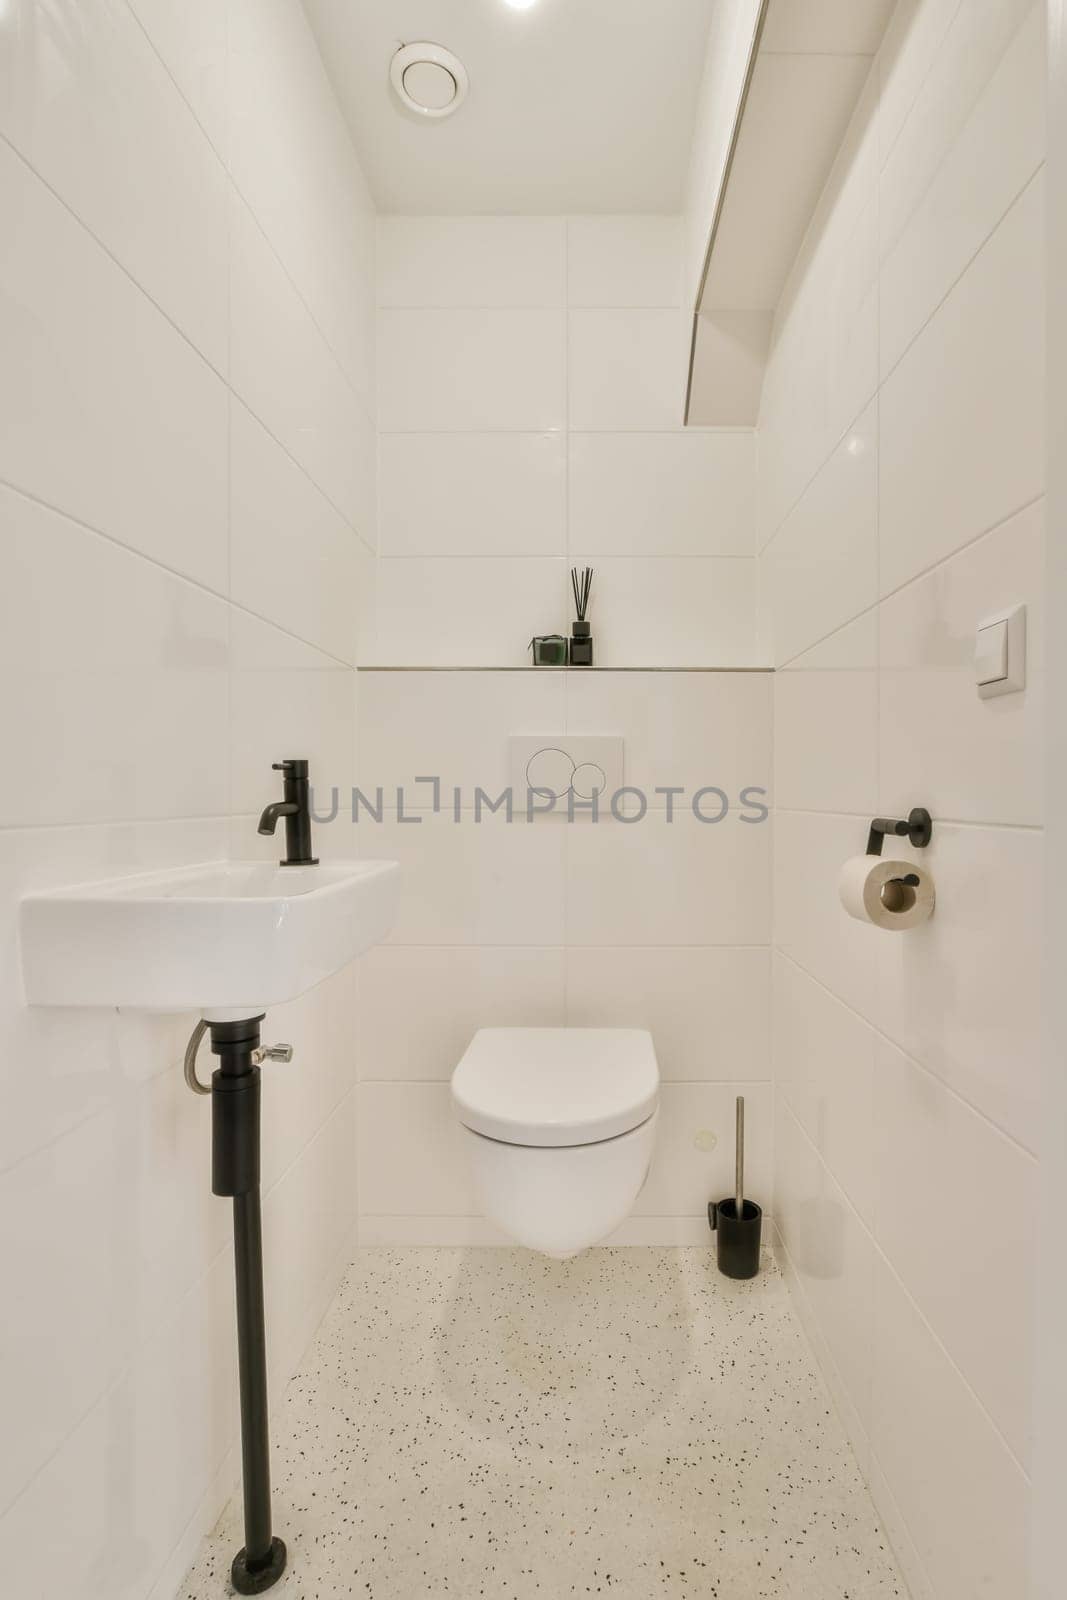 a white bathroom with black and white tiles on the floor, toilet in the fore - image taken from above